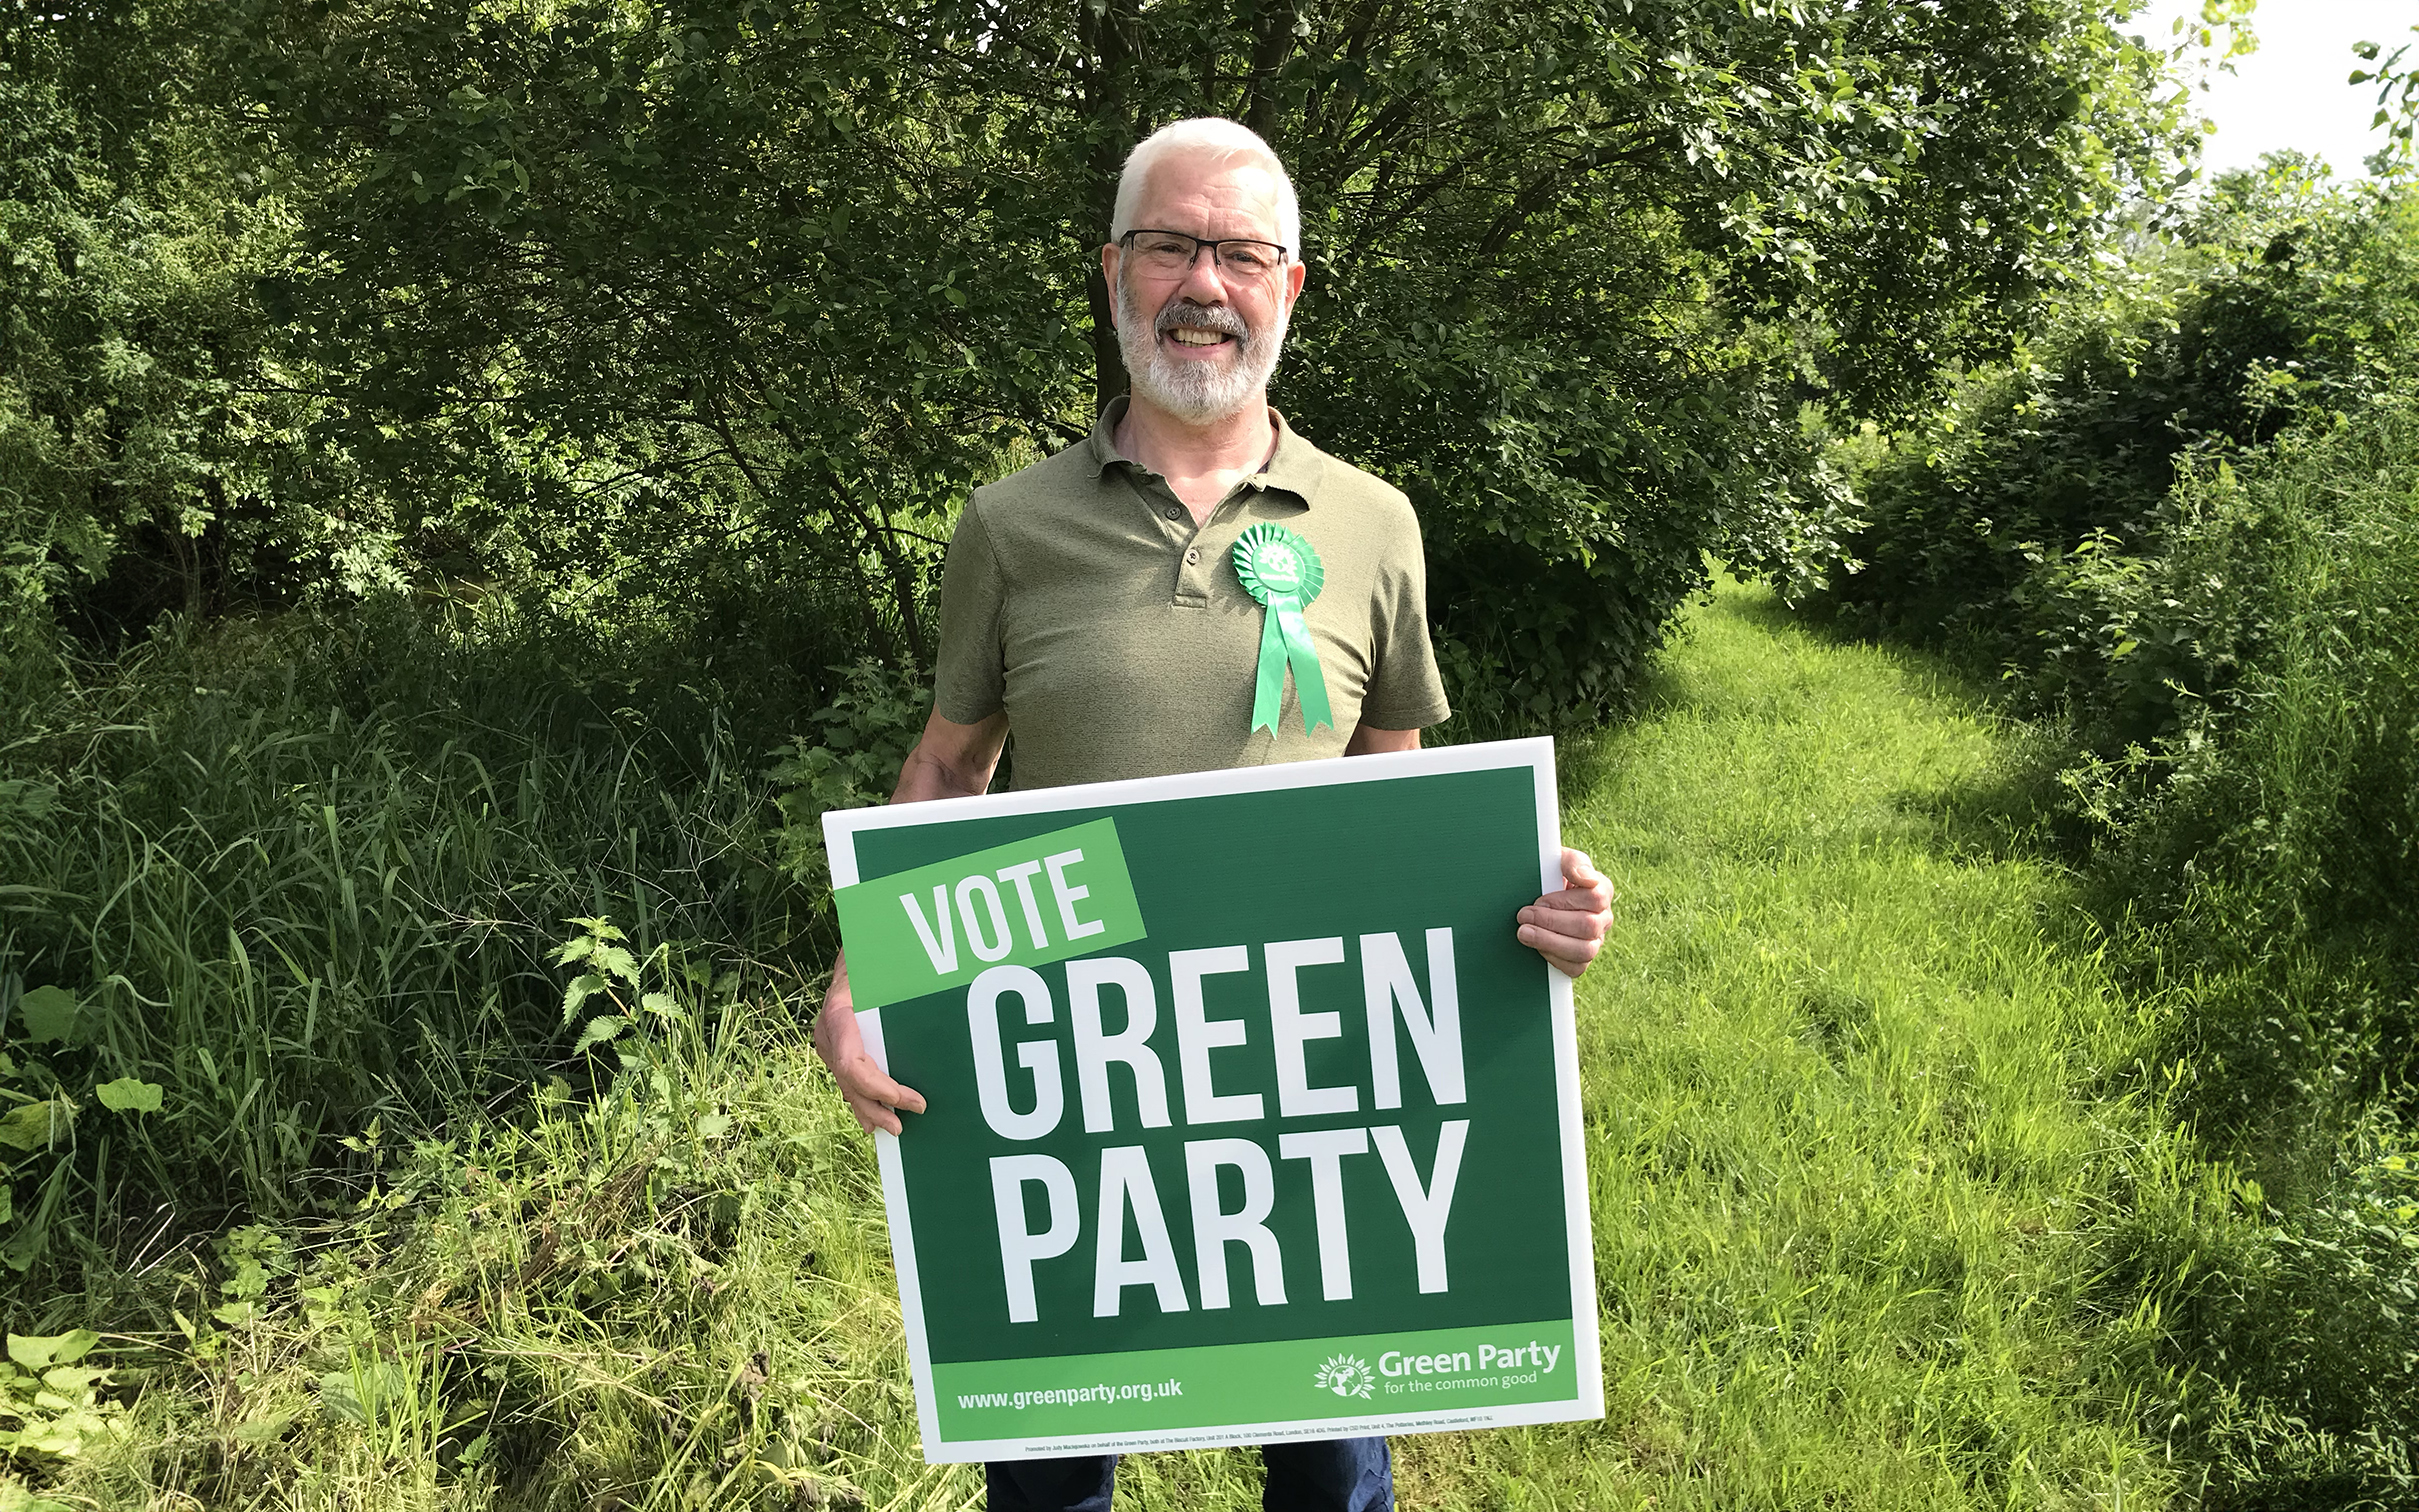 Paul de Hoest, Green Party parliamentary candidate for Harpenden and Berkhamsted